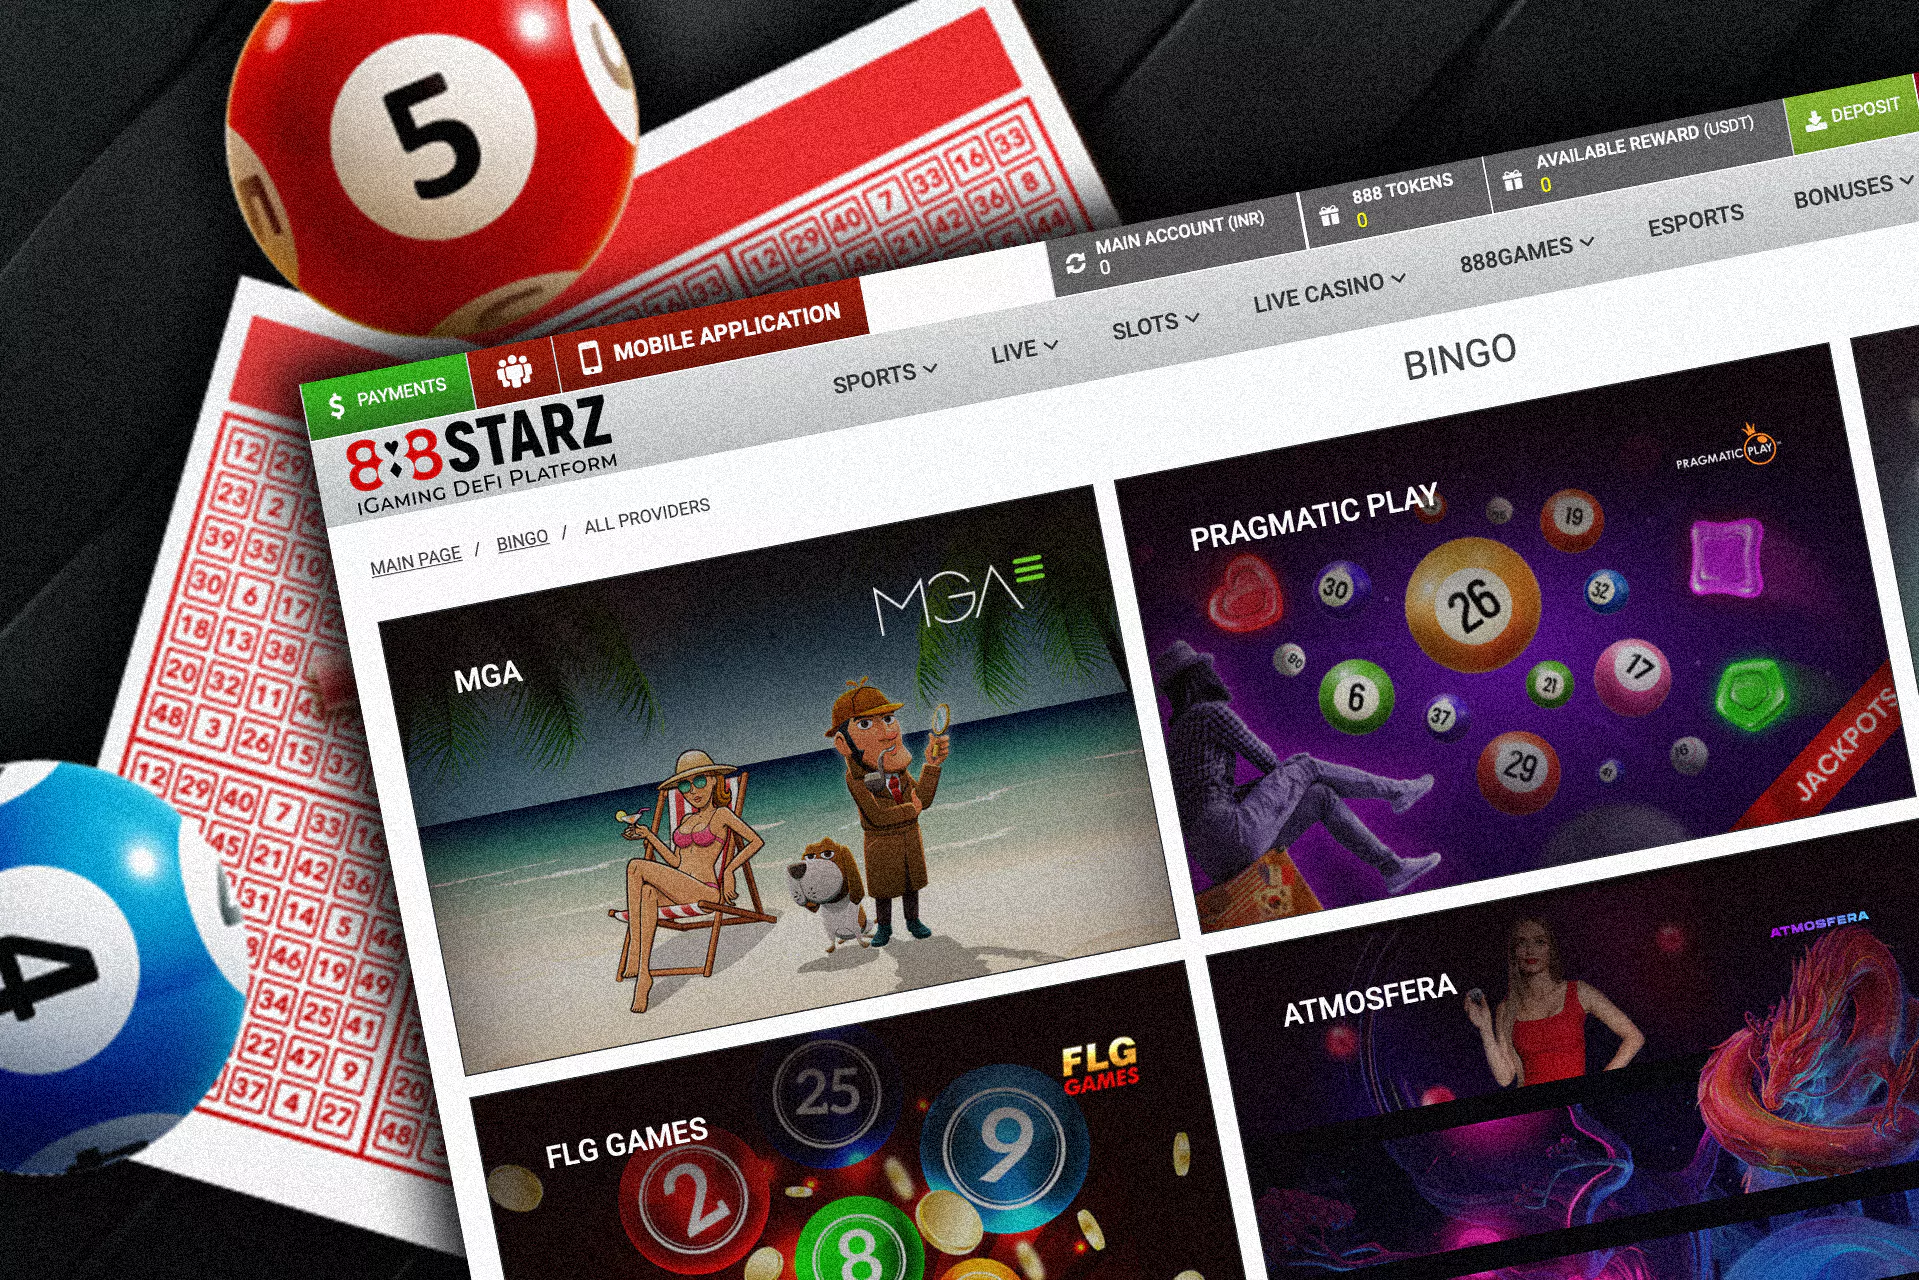 Bingo is a lottery game that is available for players of 888starz.